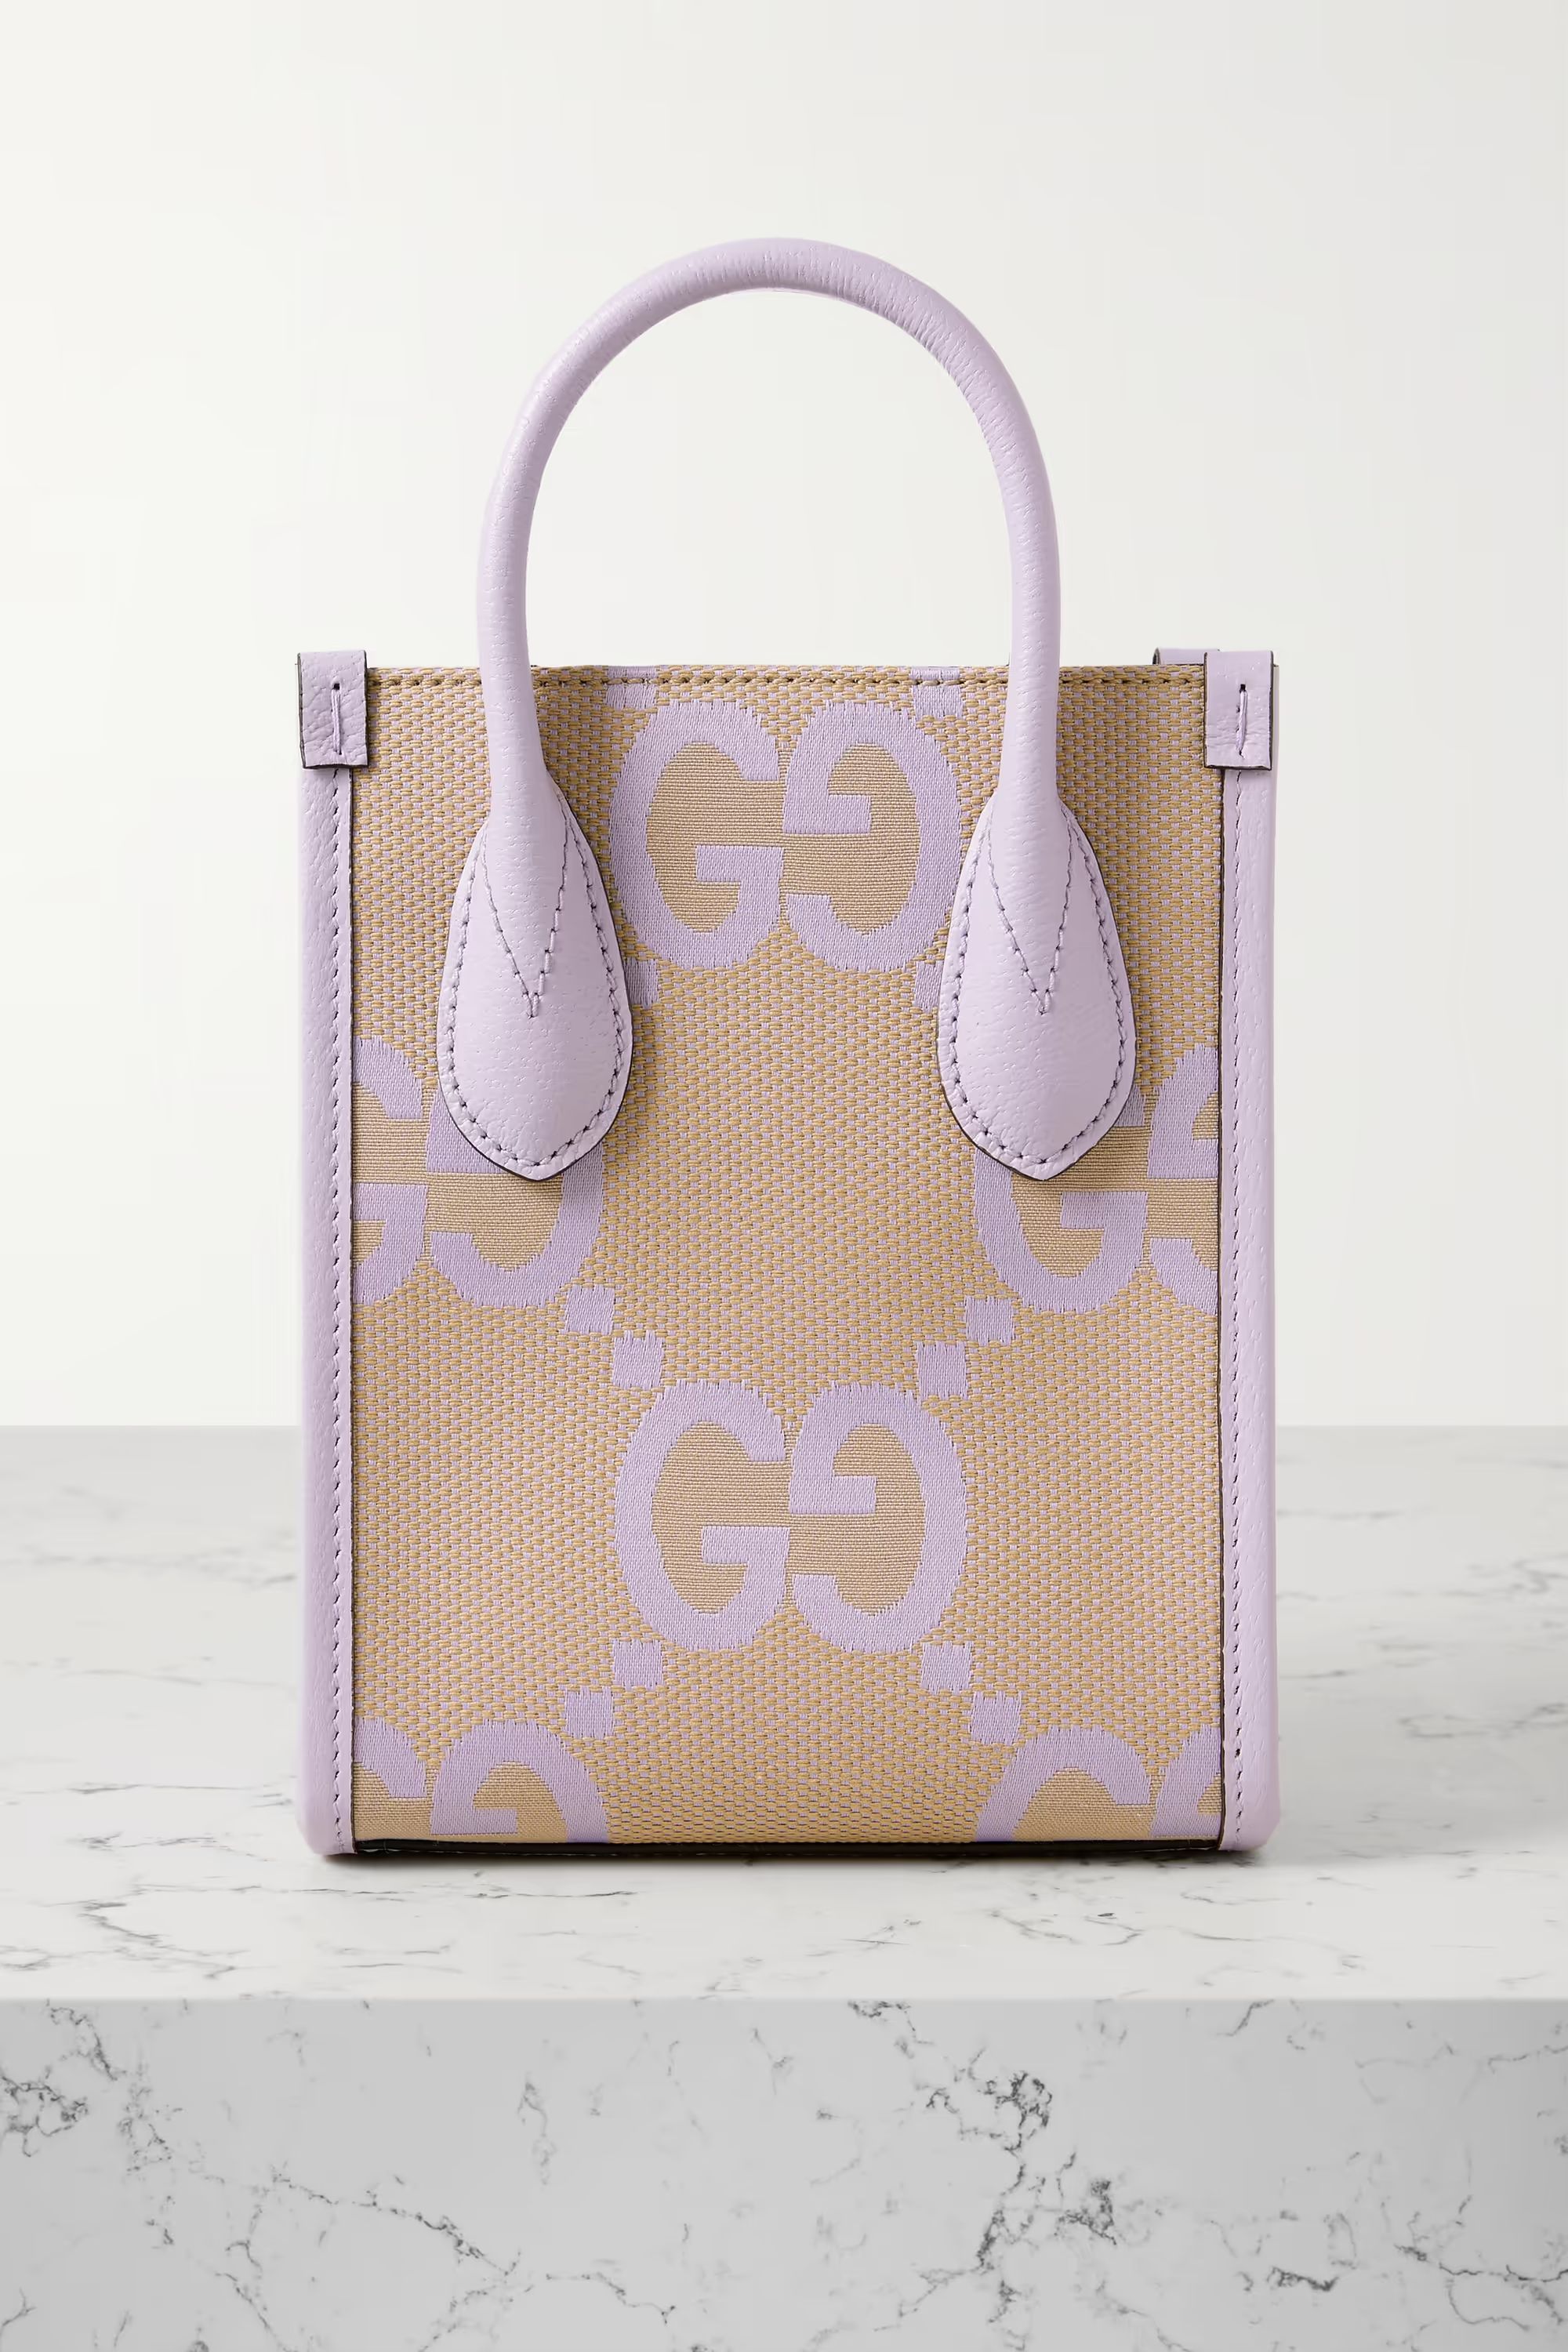 GUCCIGG Jumbo leather-trimmed canvas-jacquard tote | NET-A-PORTER (US)